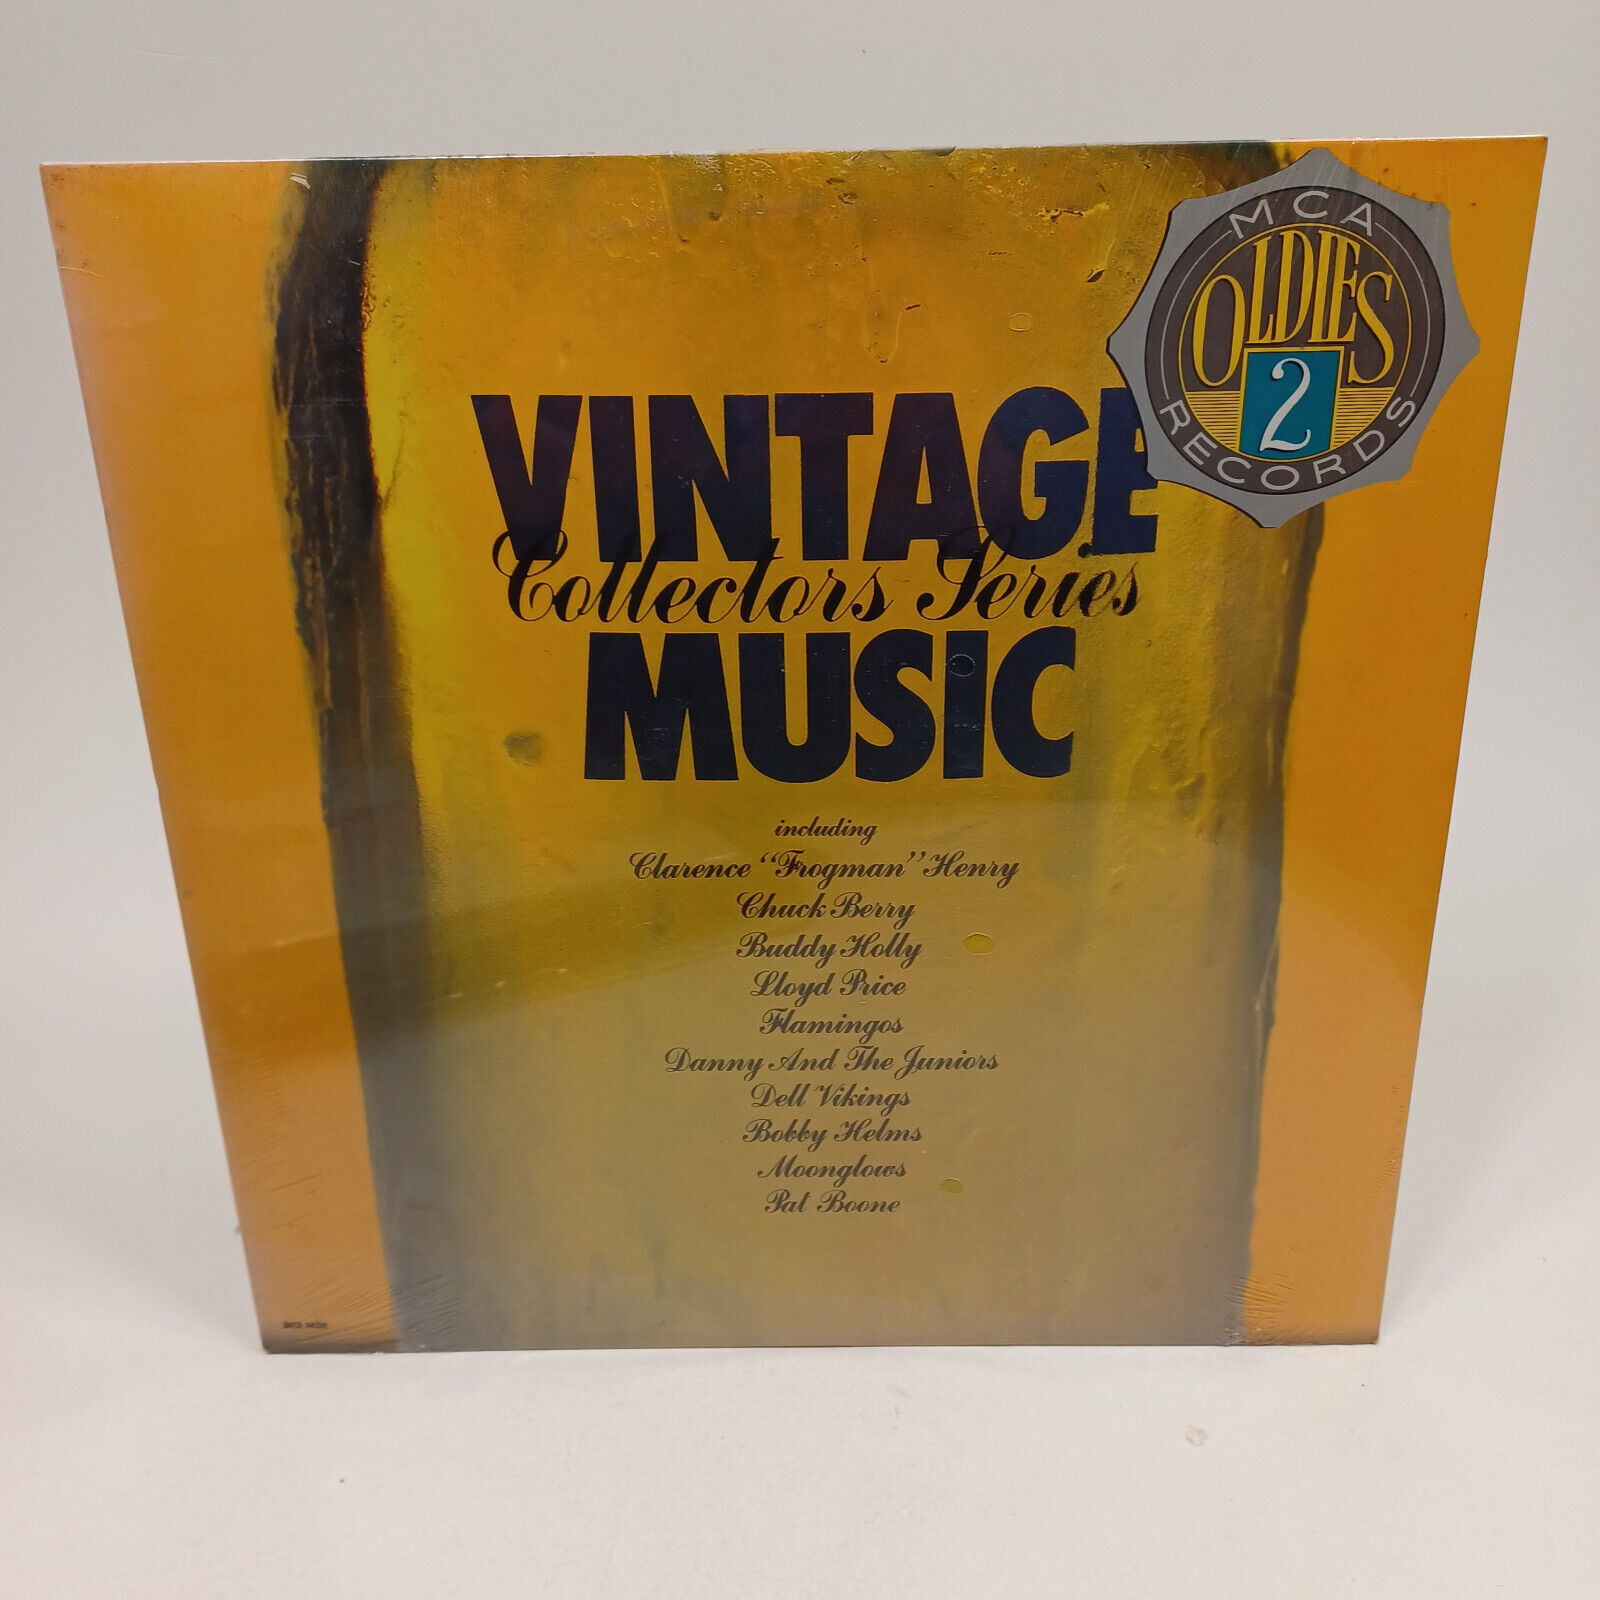 Vintage Music Collectors Series - Oldies Volume Two C7350A NEW